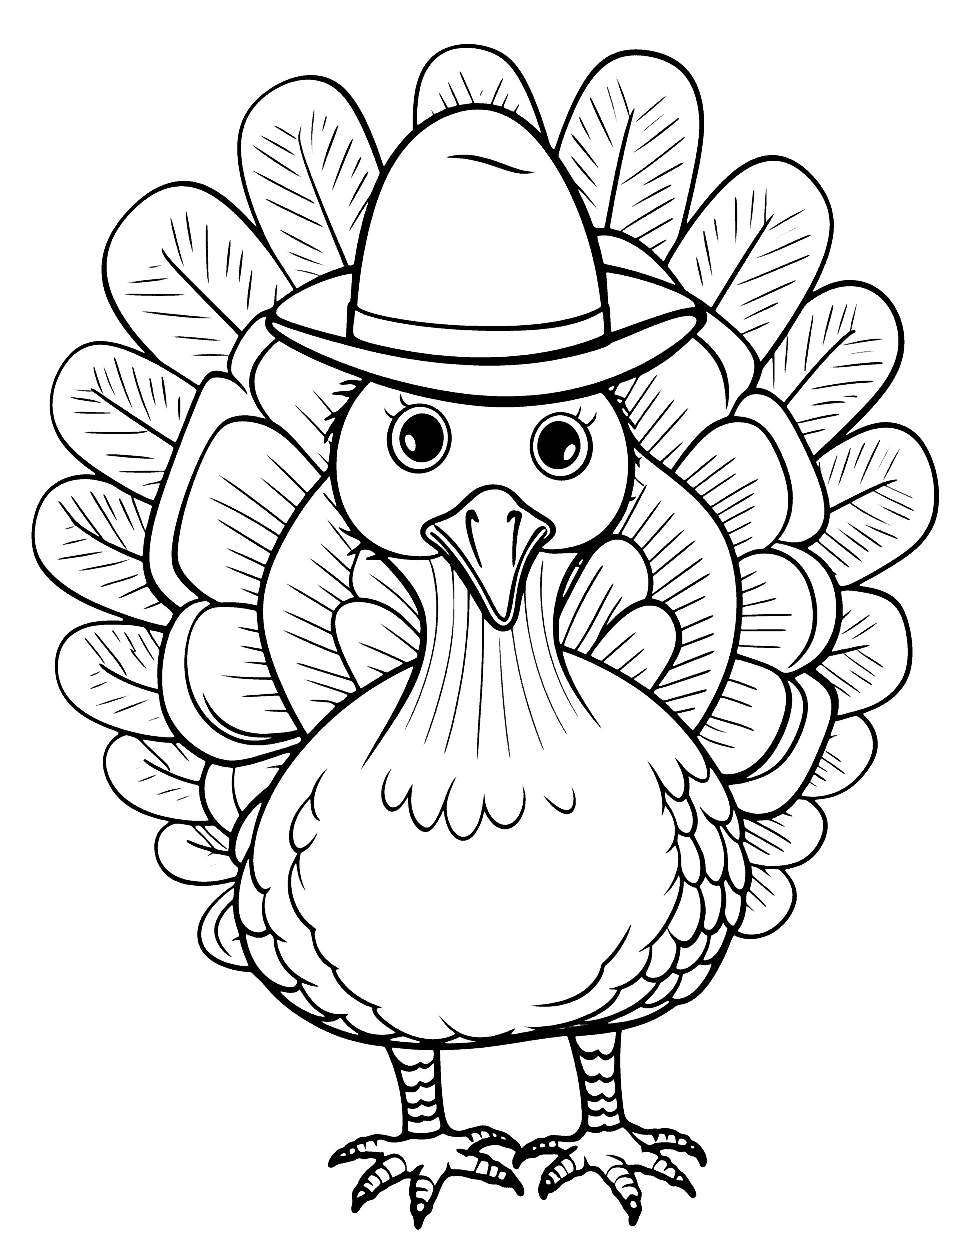 Turkey With a Hat Coloring Page - A turkey in creative disguise, wearing a hat, waiting to be colored in.